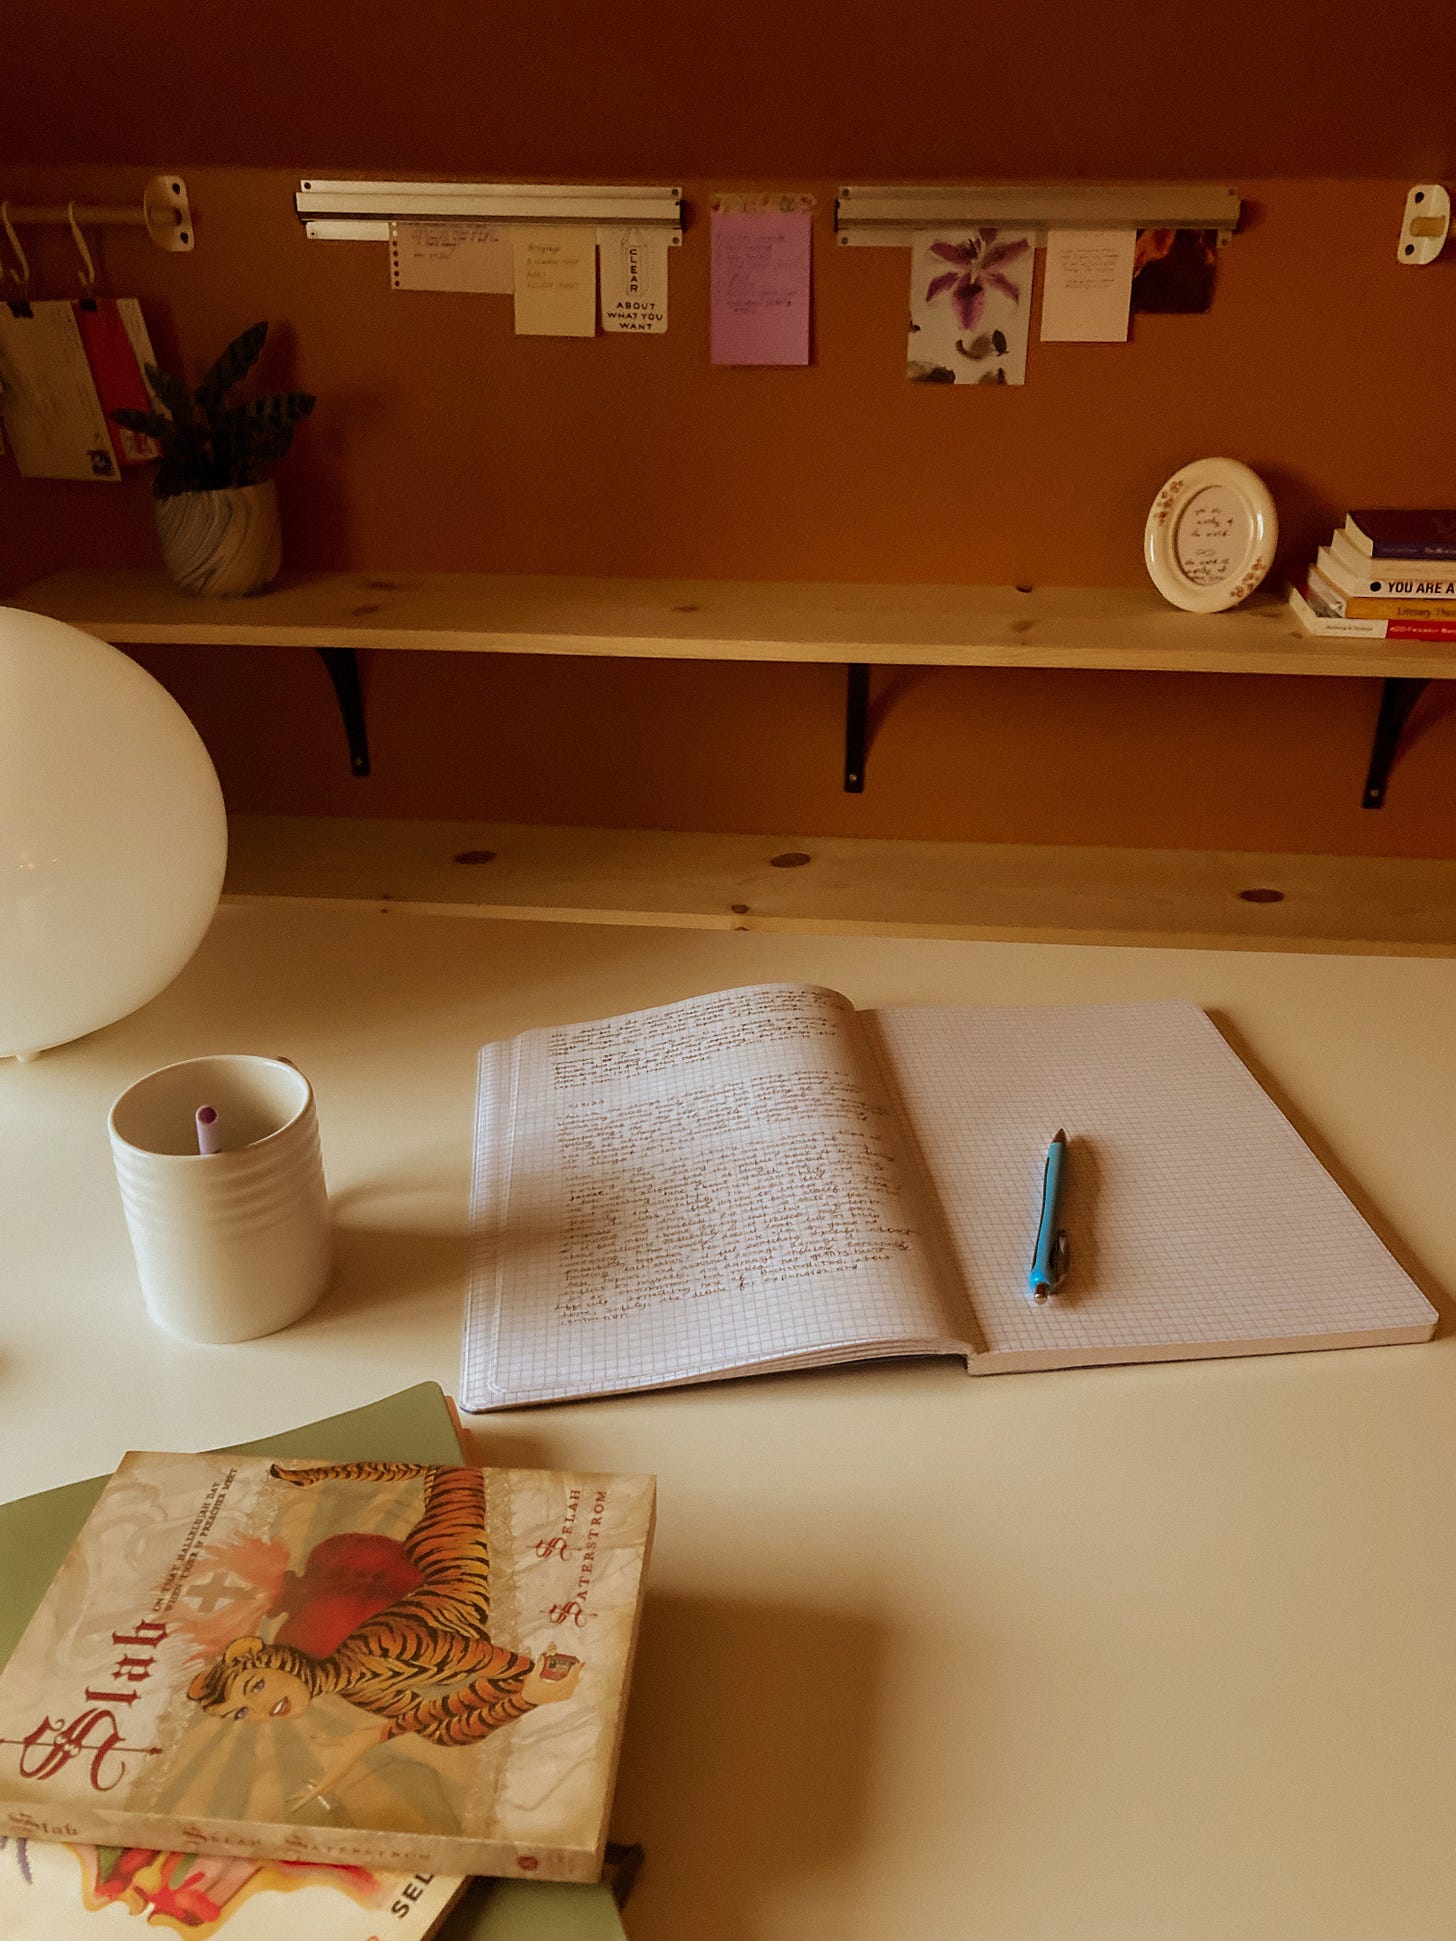 A notebook is open on a desk, next to Selah Saterstrom's book Slab, and a mug.